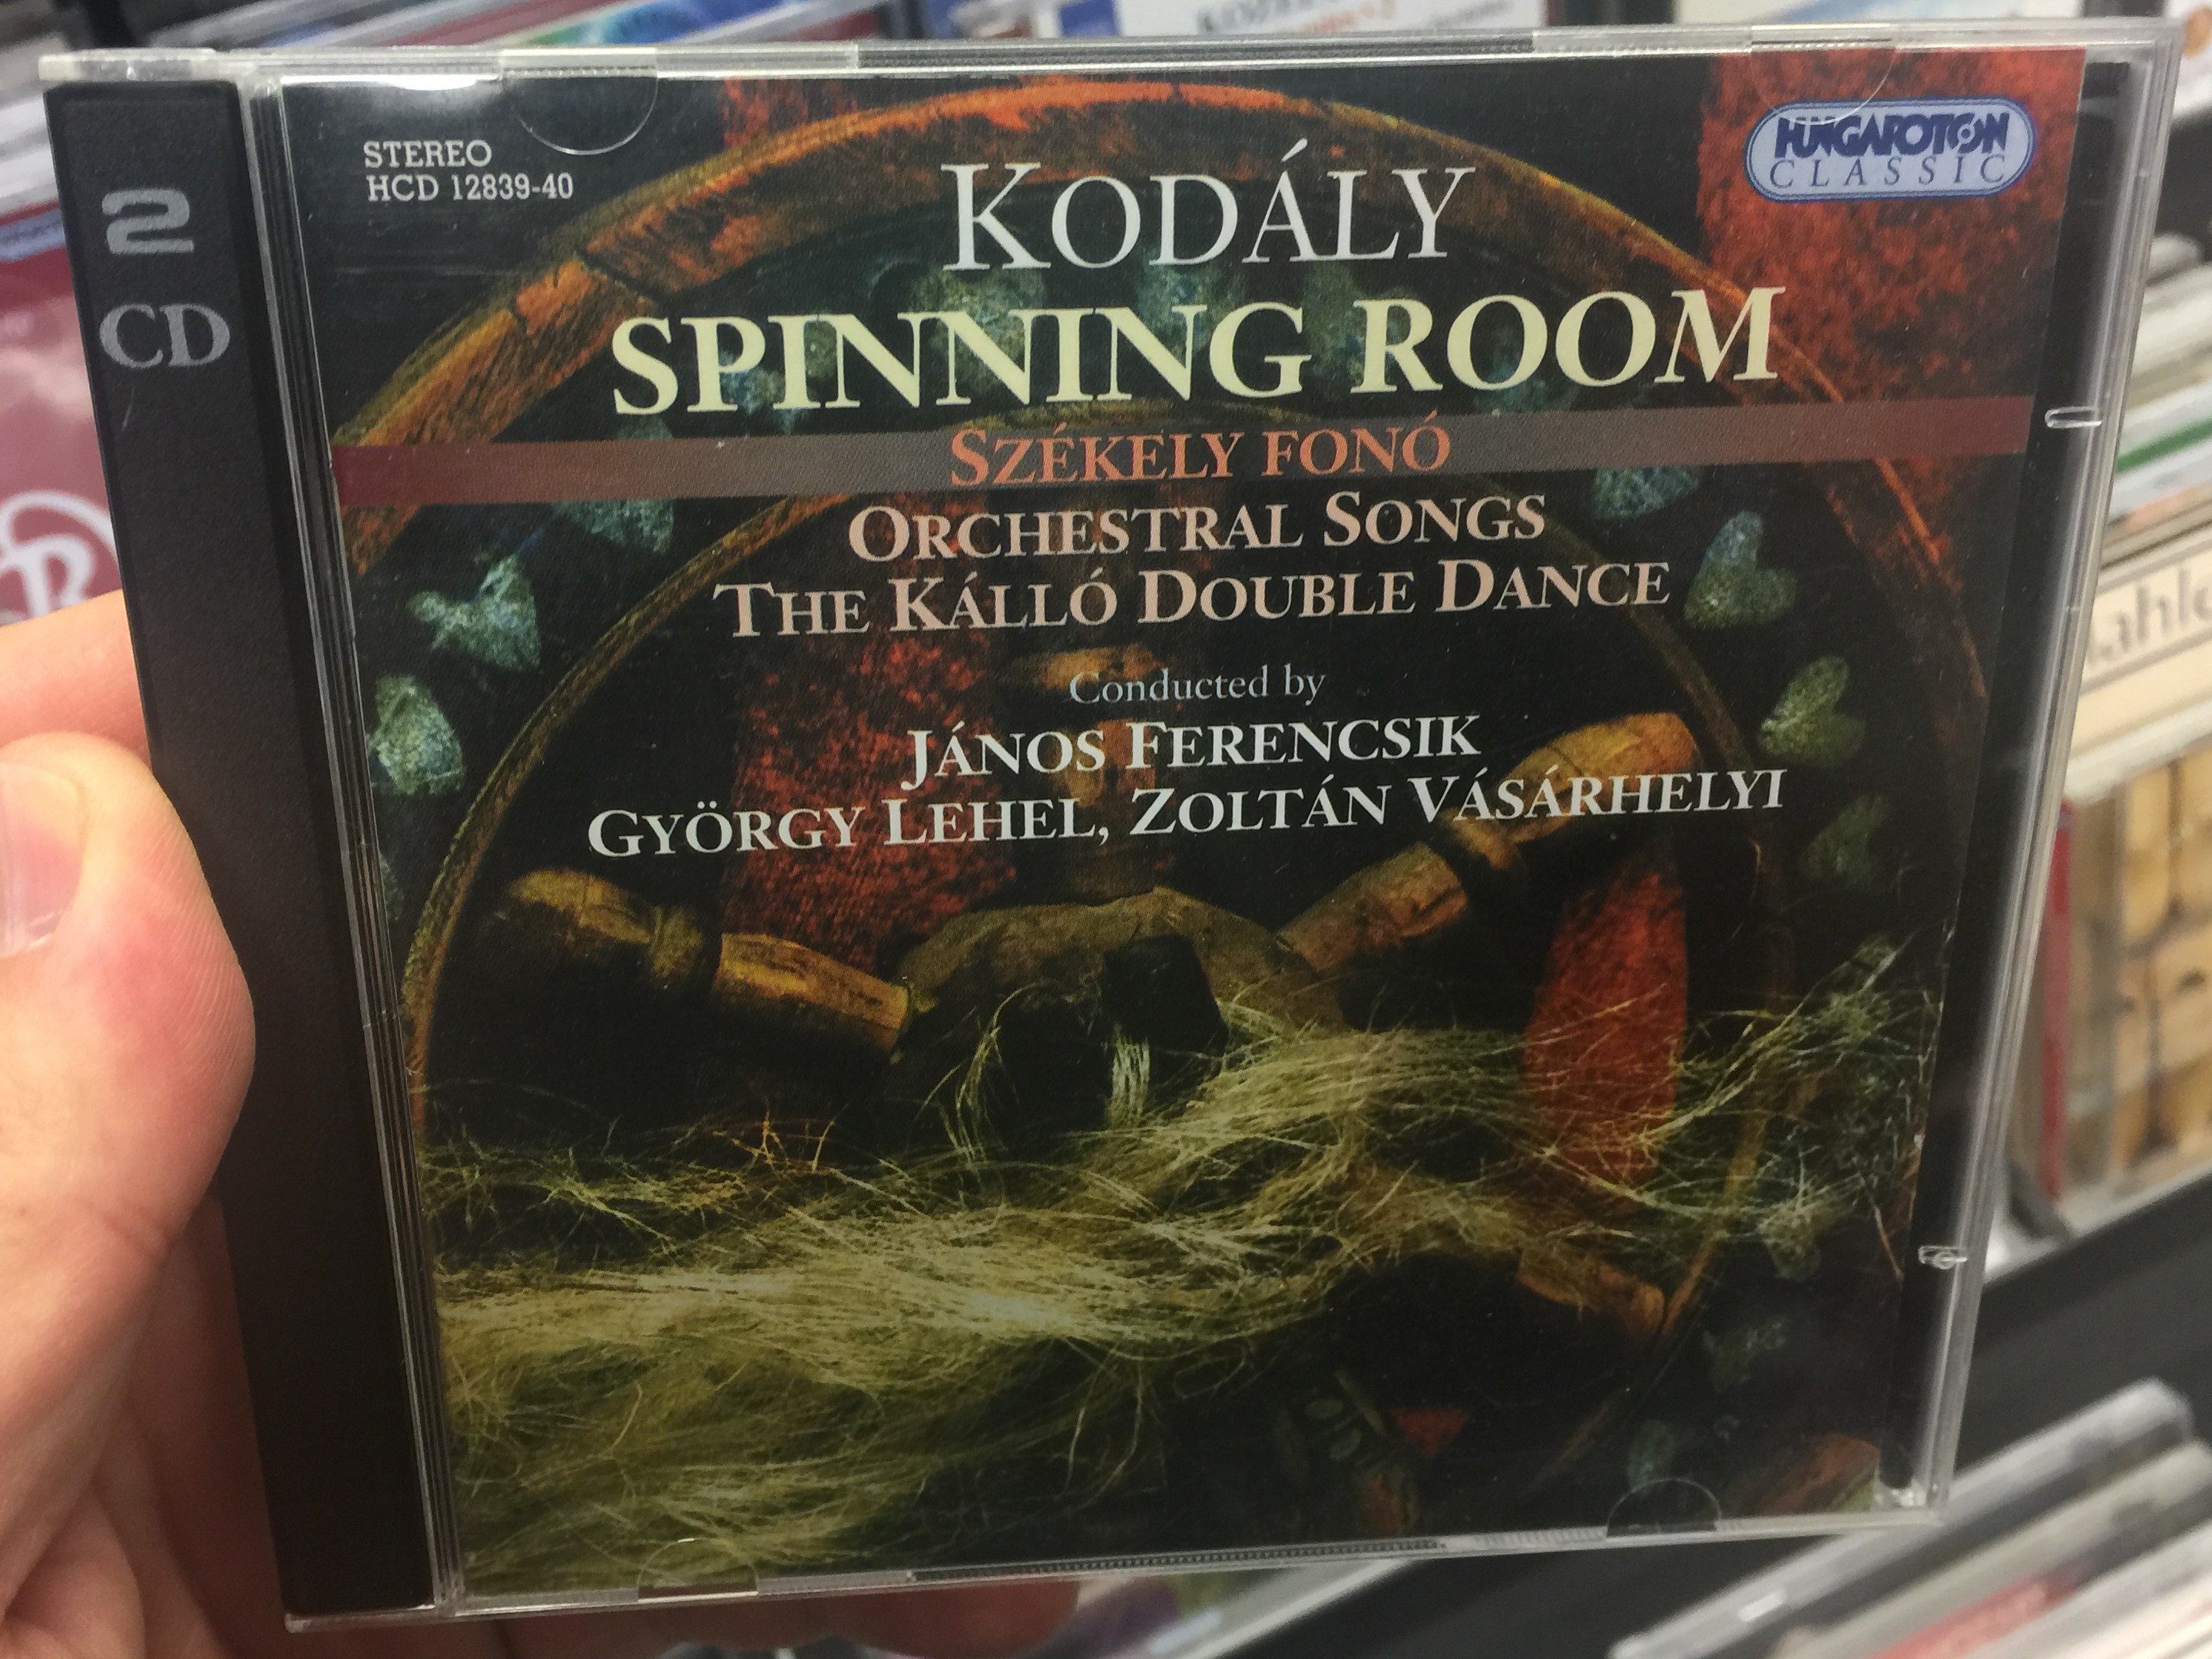 kod-ly-spinning-room-szekely-fono-orchestral-songs-the-kallo-double-dance-conducted-by-j-nos-ferencsik-gy-rgy-lehel-zolt-n-v-s-rhelyi-hungaroton-classic-2x-audio-cd-1996-stereo-hcd-1283-1-.jpg